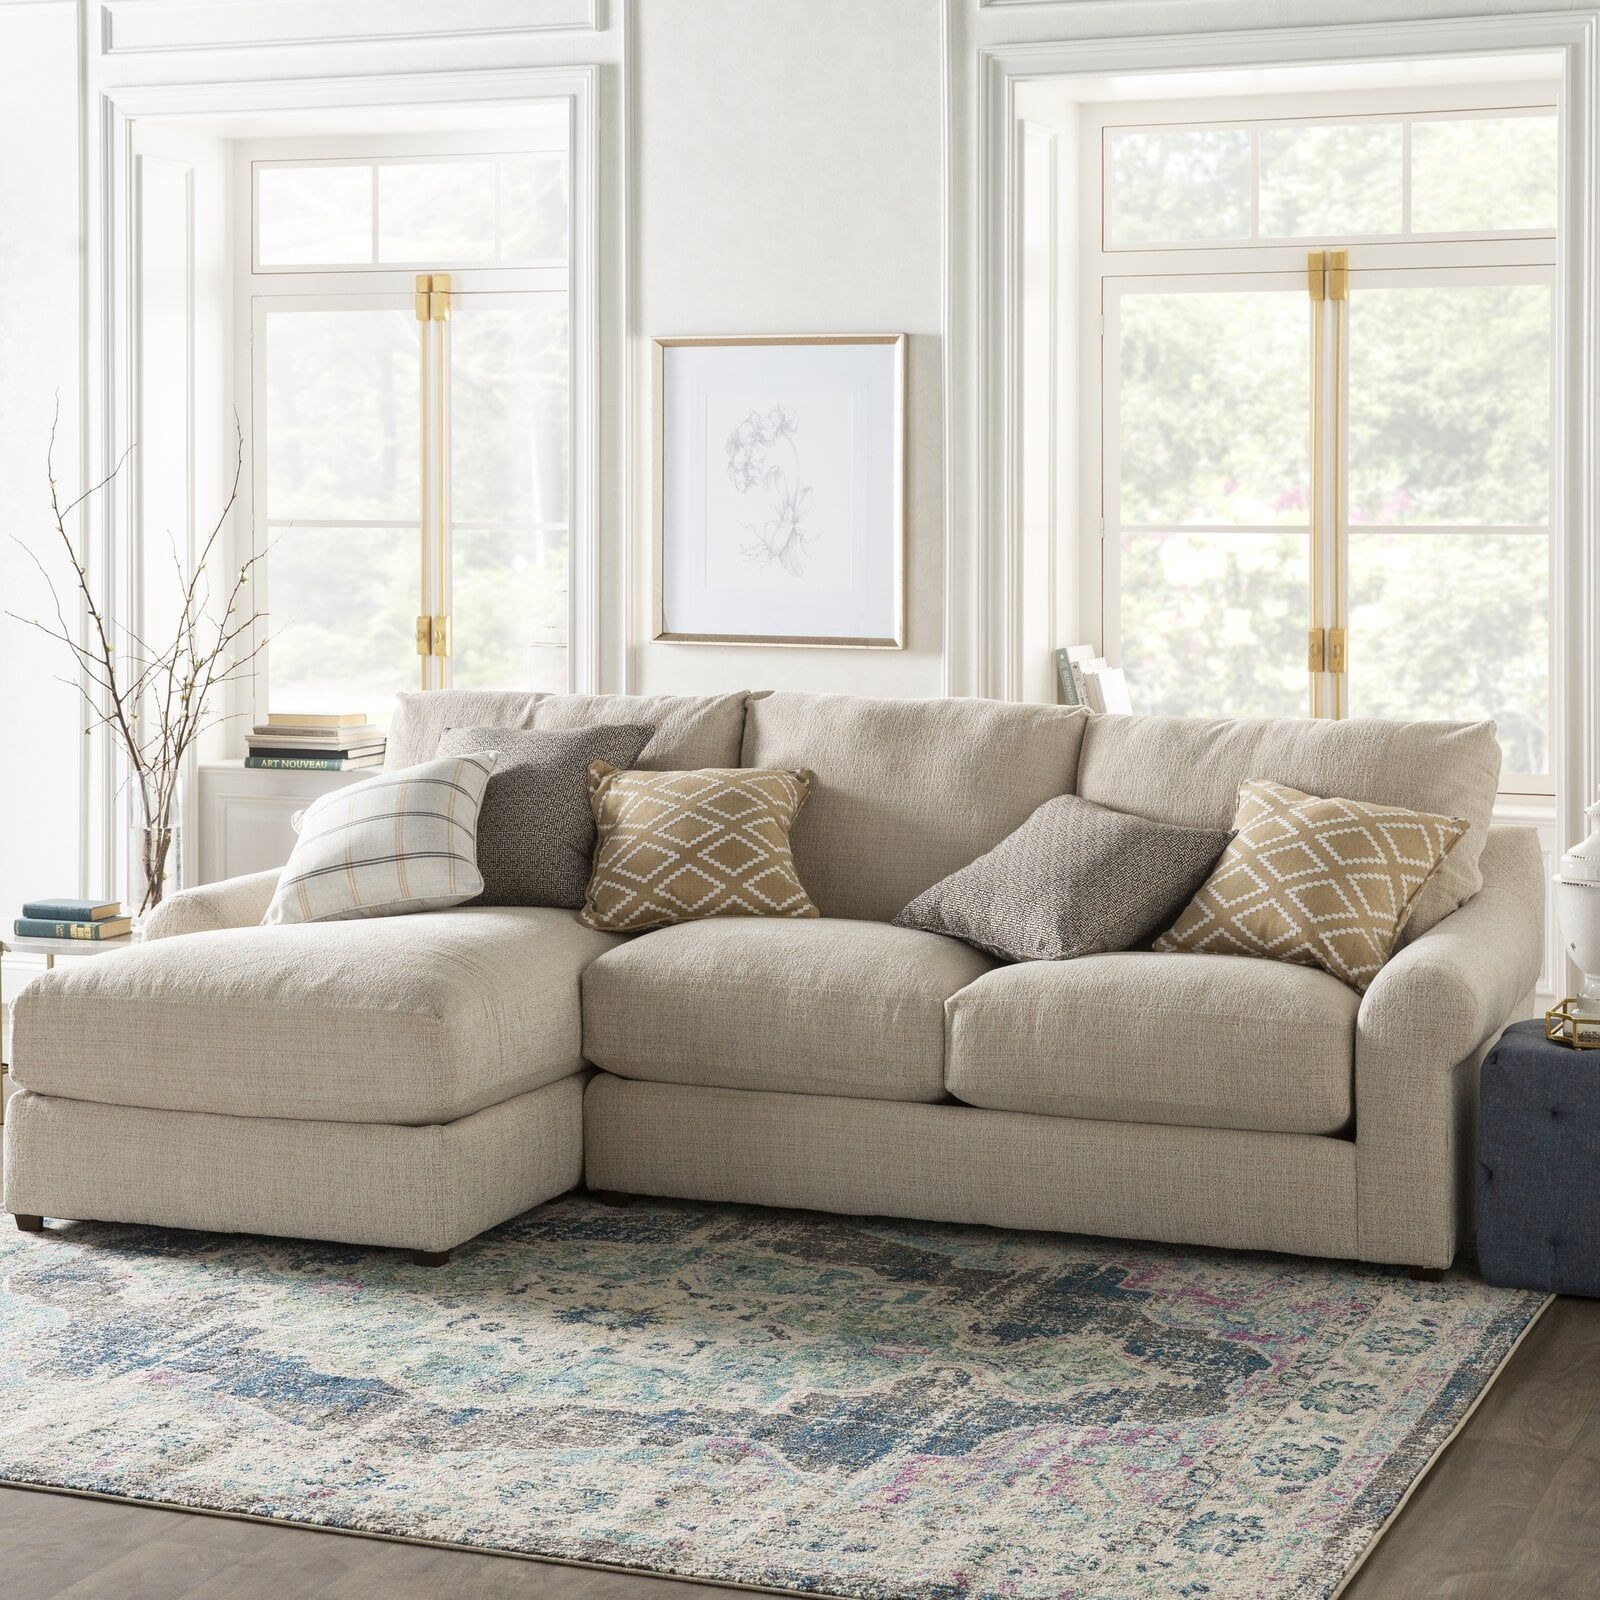 The chenille sofa, changing the ambience
of your living room